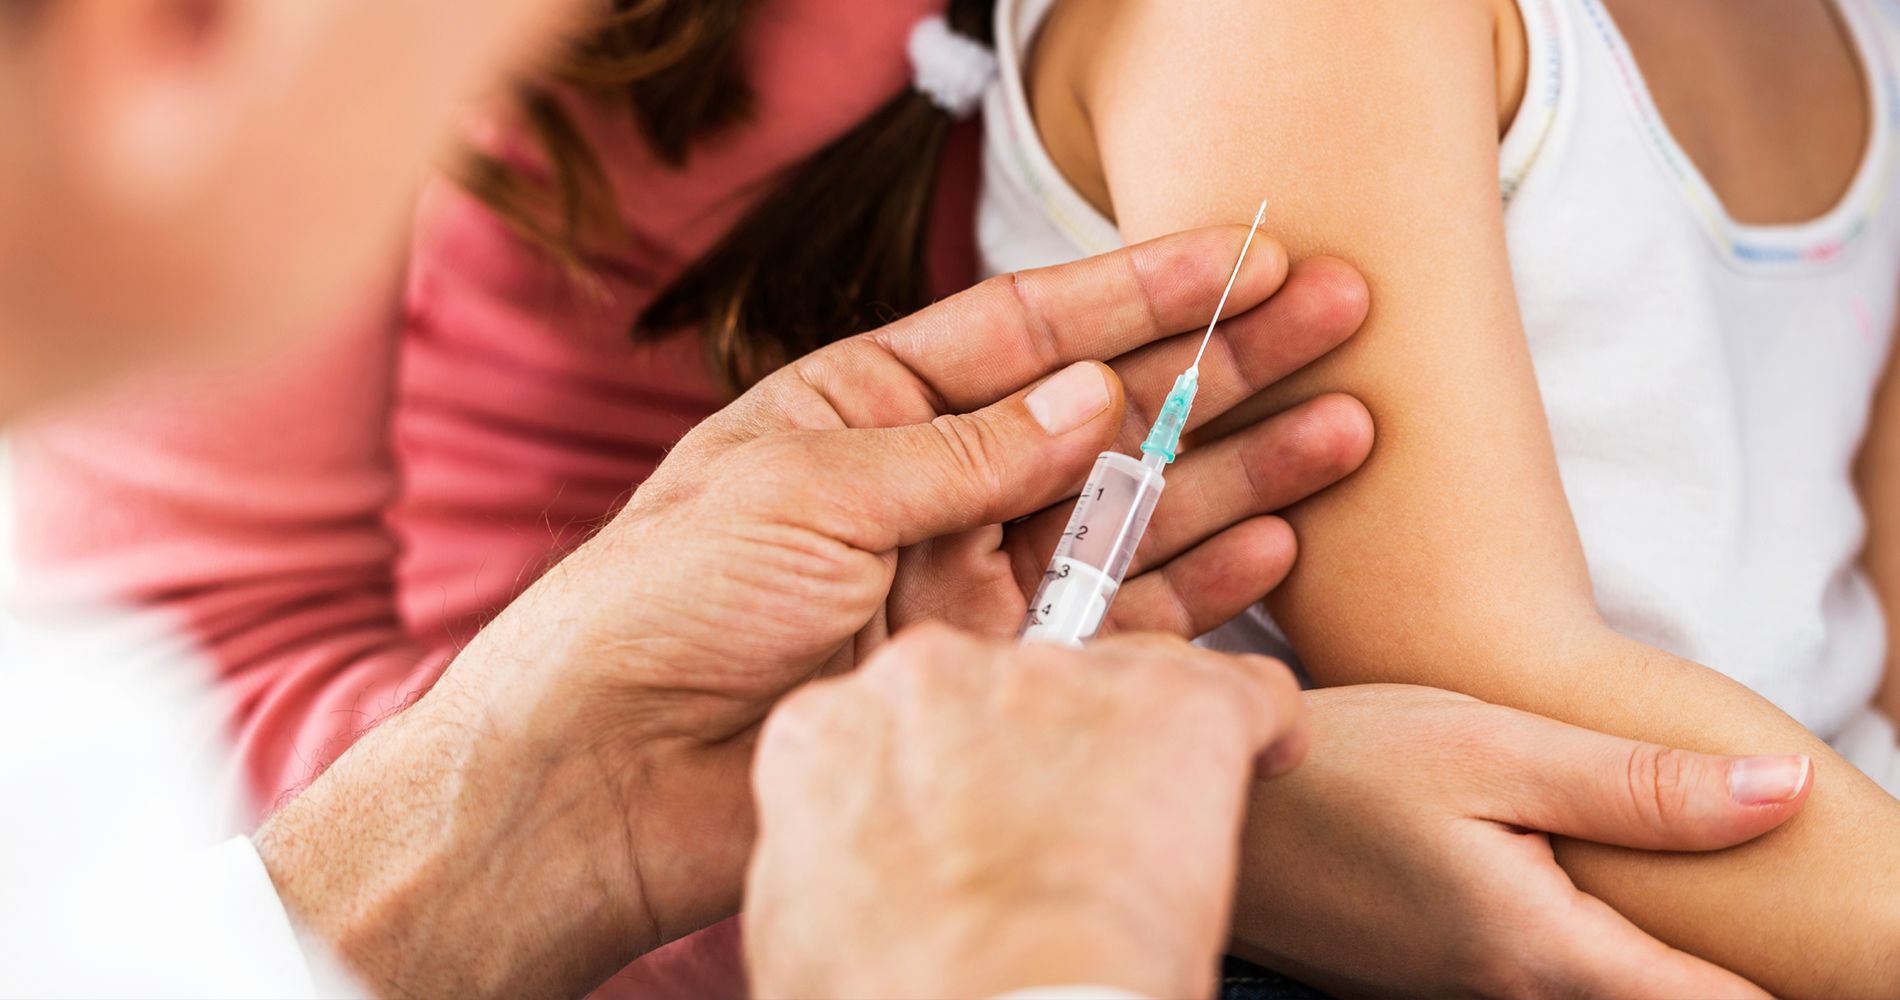 New Flu Vaccine Expected to Perform Better This Flu Season